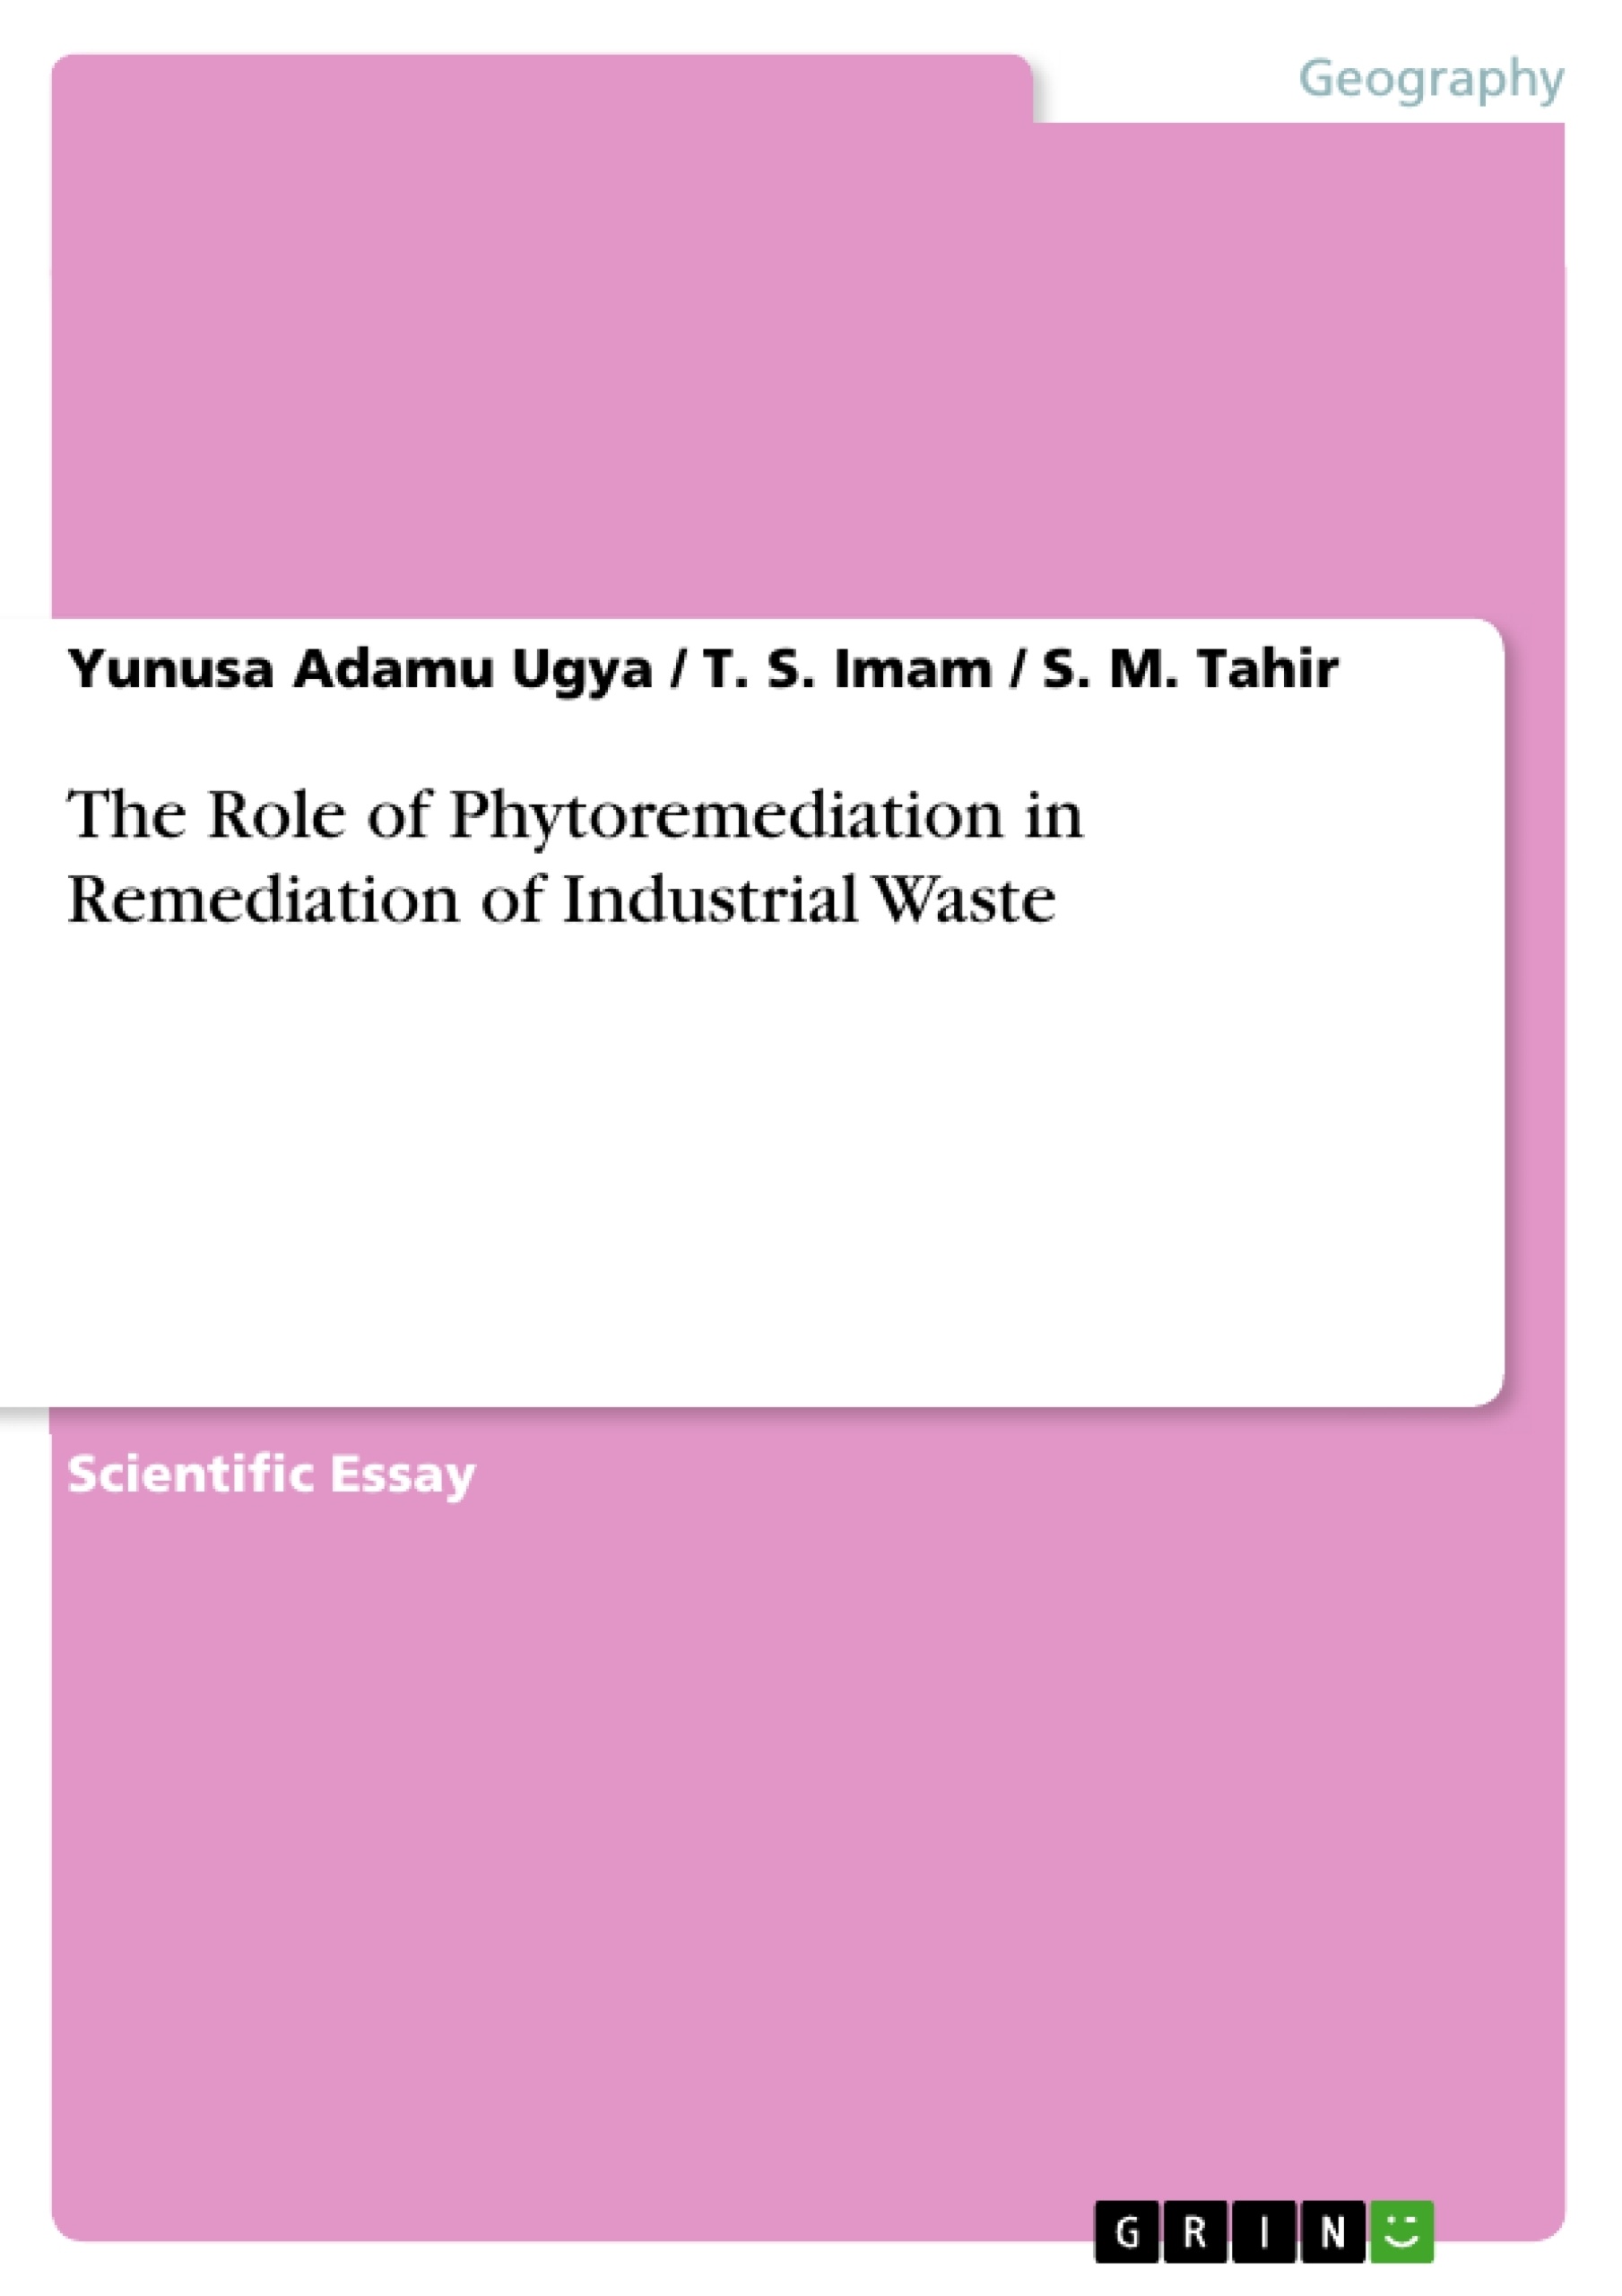 Title: The Role of Phytoremediation in Remediation of Industrial Waste